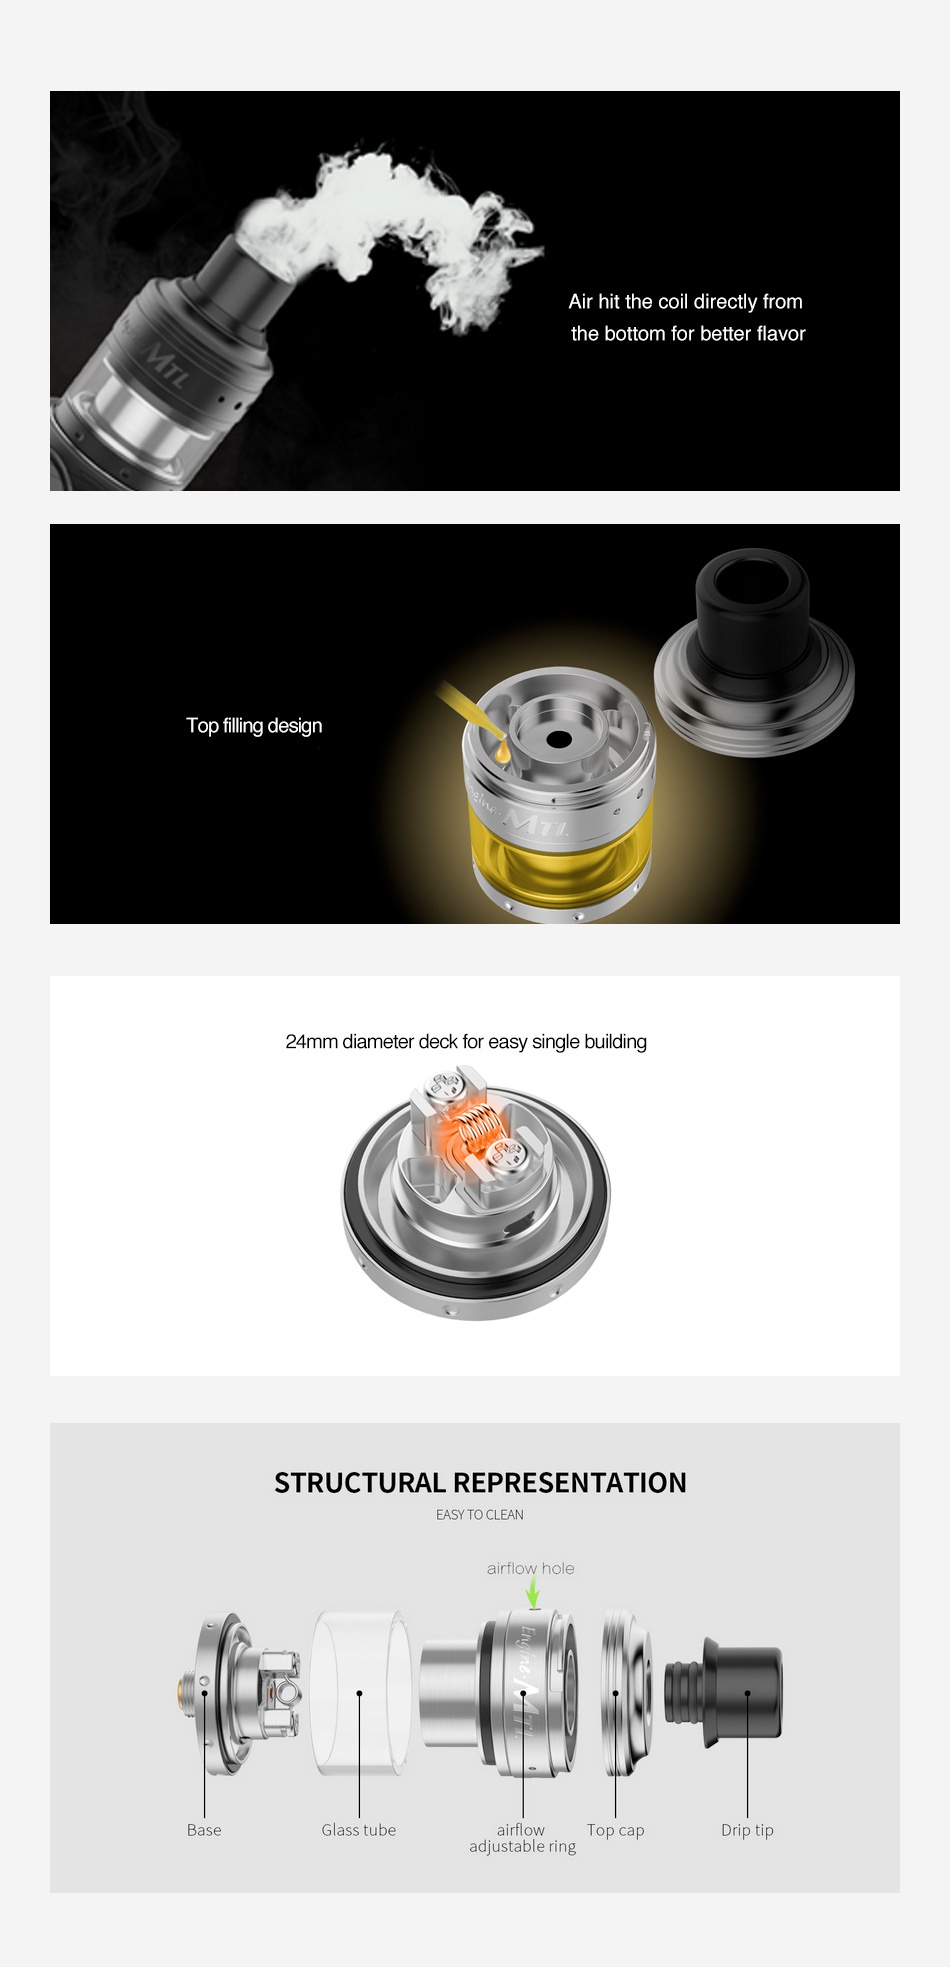 OBS Engine MTL RTA 2ml Air hit the coil directly from the bottom for better flay 24mm diameter deck for easy single building STRUCTURAL REPRESENTATION ASY TO CLEAN Glass tube op cap adjustable ring